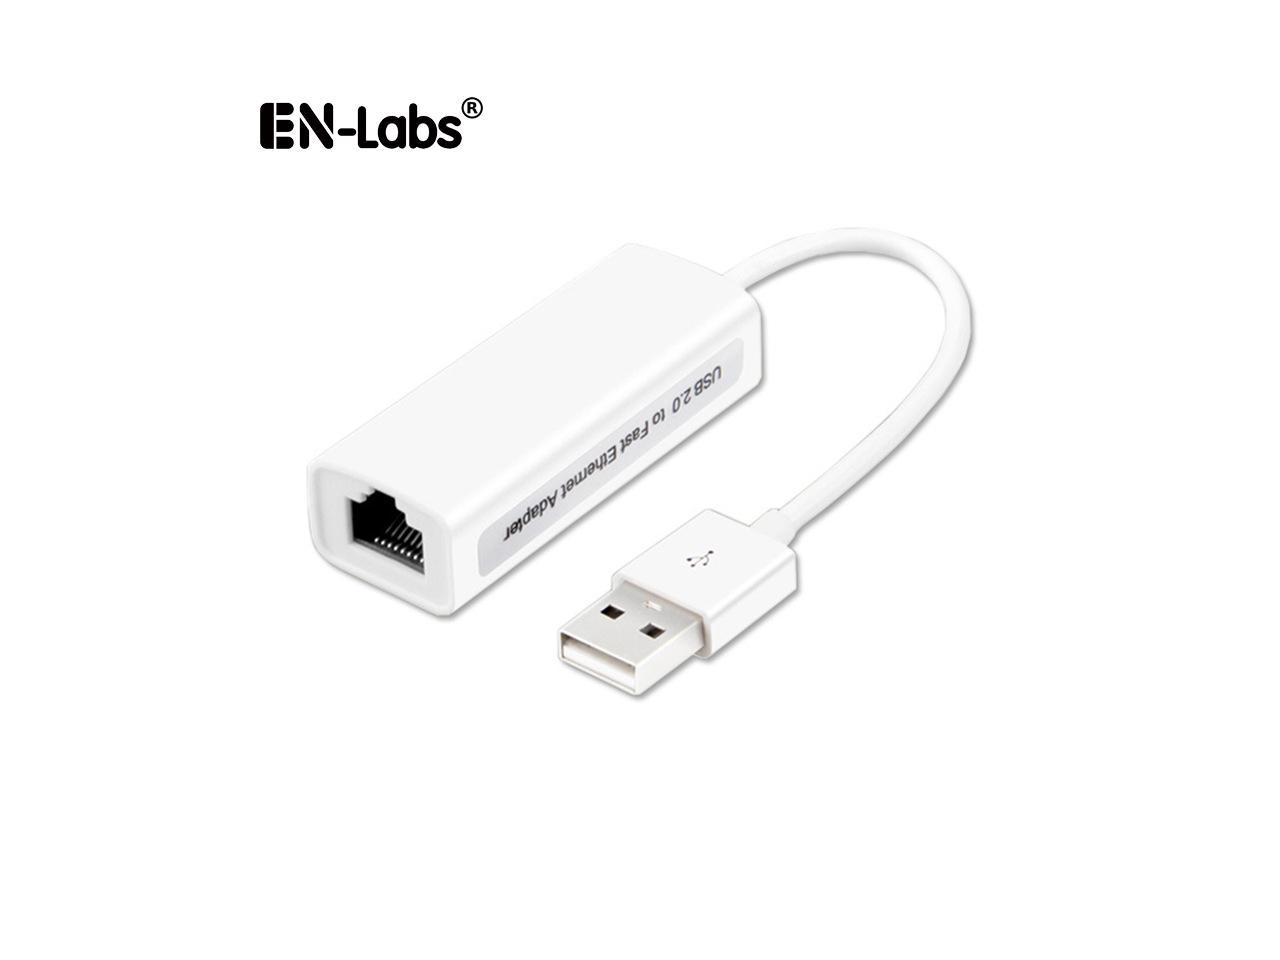 Cable Length: Other ShineBear USB 2.0 to RJ45 LAN Ethernet Network Adapter for Apple Mac MacBook Air Laptop PC 